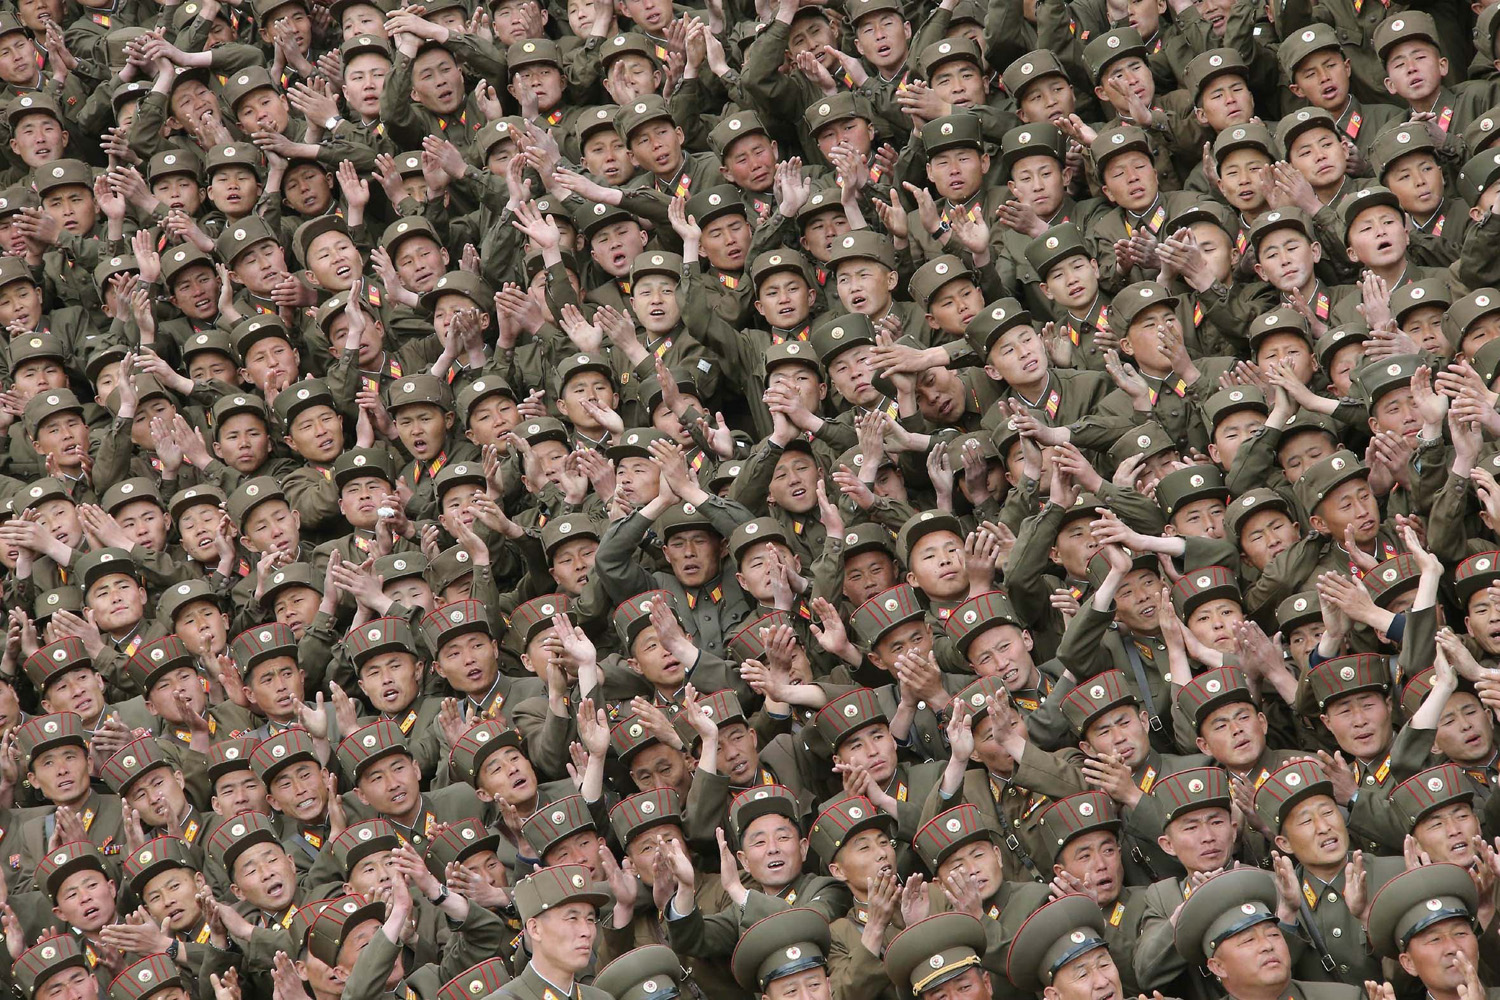 Soldier-builders of KPA Units 966, 462, 101, 489, who took part in building the workers' hostel of Kim Jong Suk Pyongyang Textile Mill, applaud during a photo session with North Korean leader Kim Jong Un